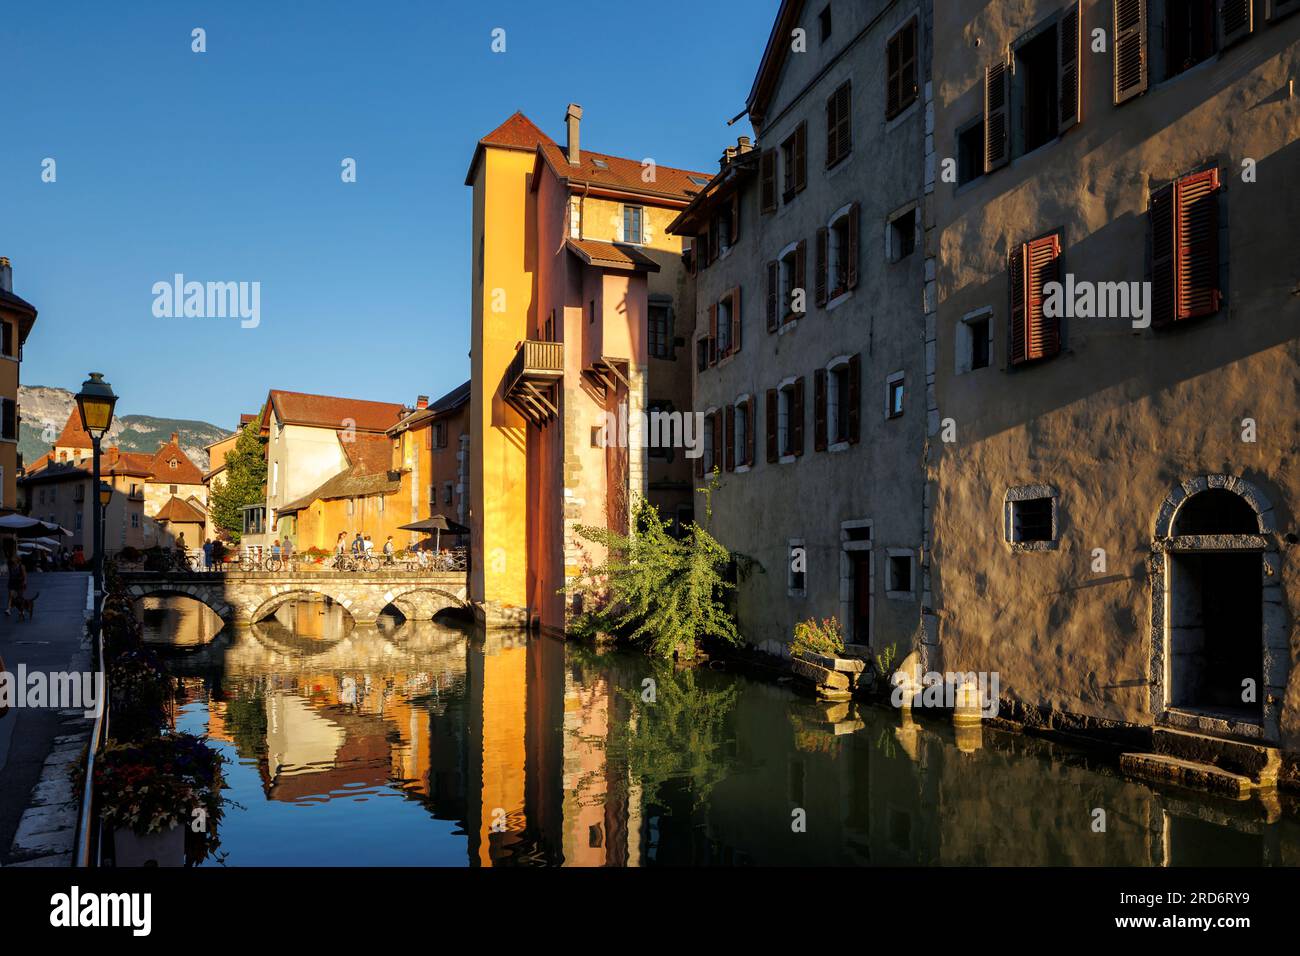 Old buildings reflected in Le Thiou flowing through old town Annecy Haute-Savoie Auvergne-Rhone-Alpes France Stock Photo